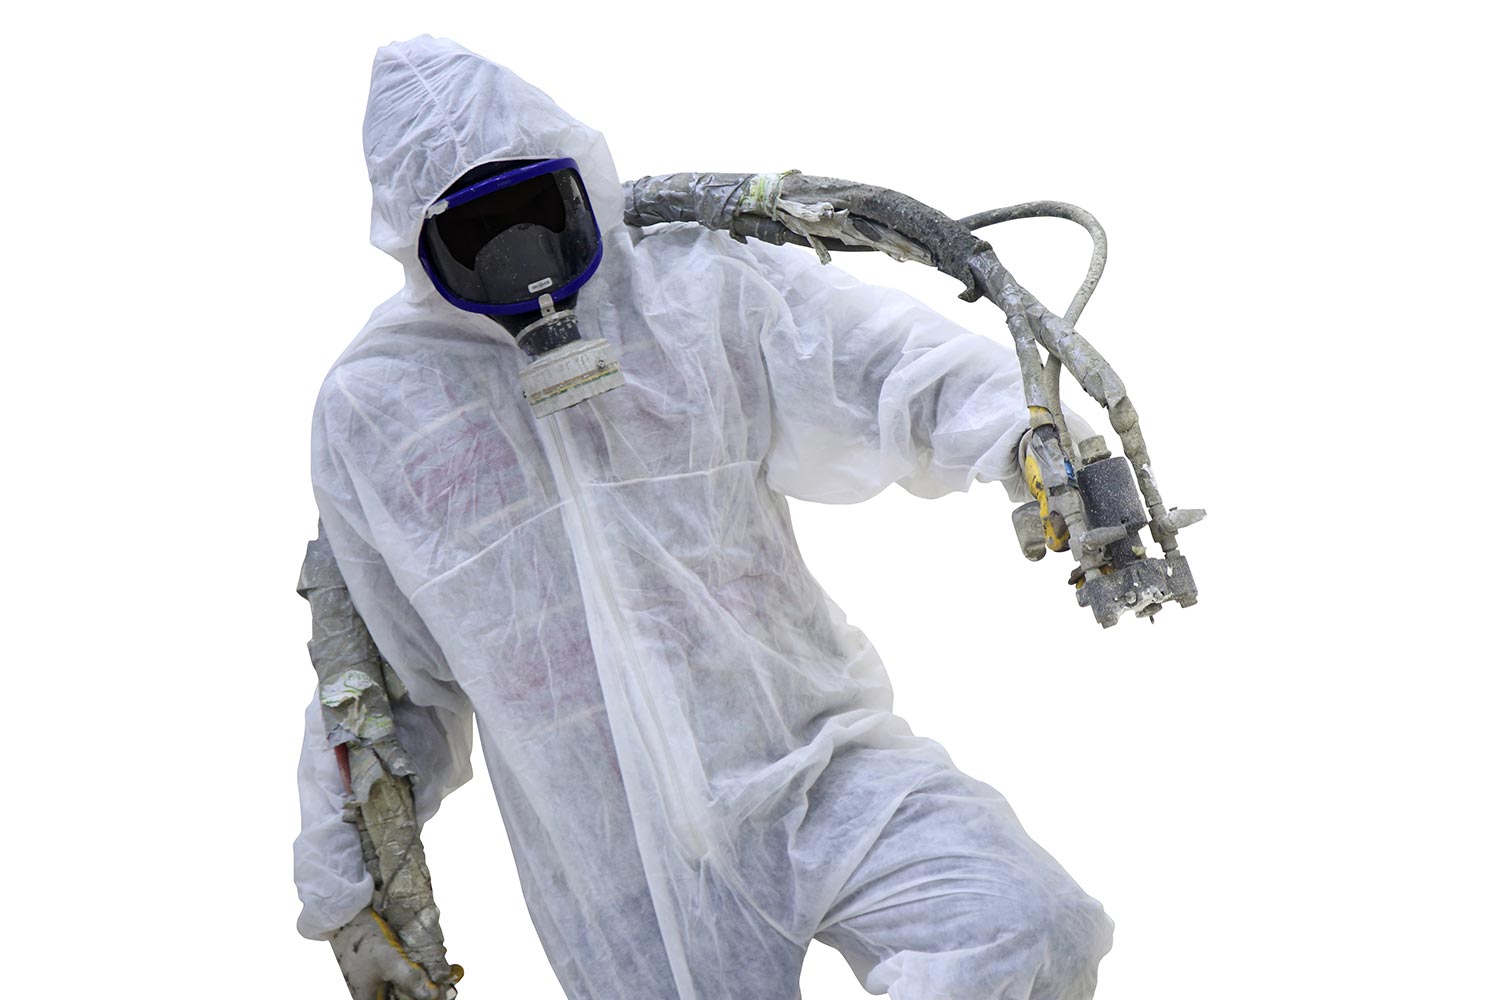 Technician in the white protect suit